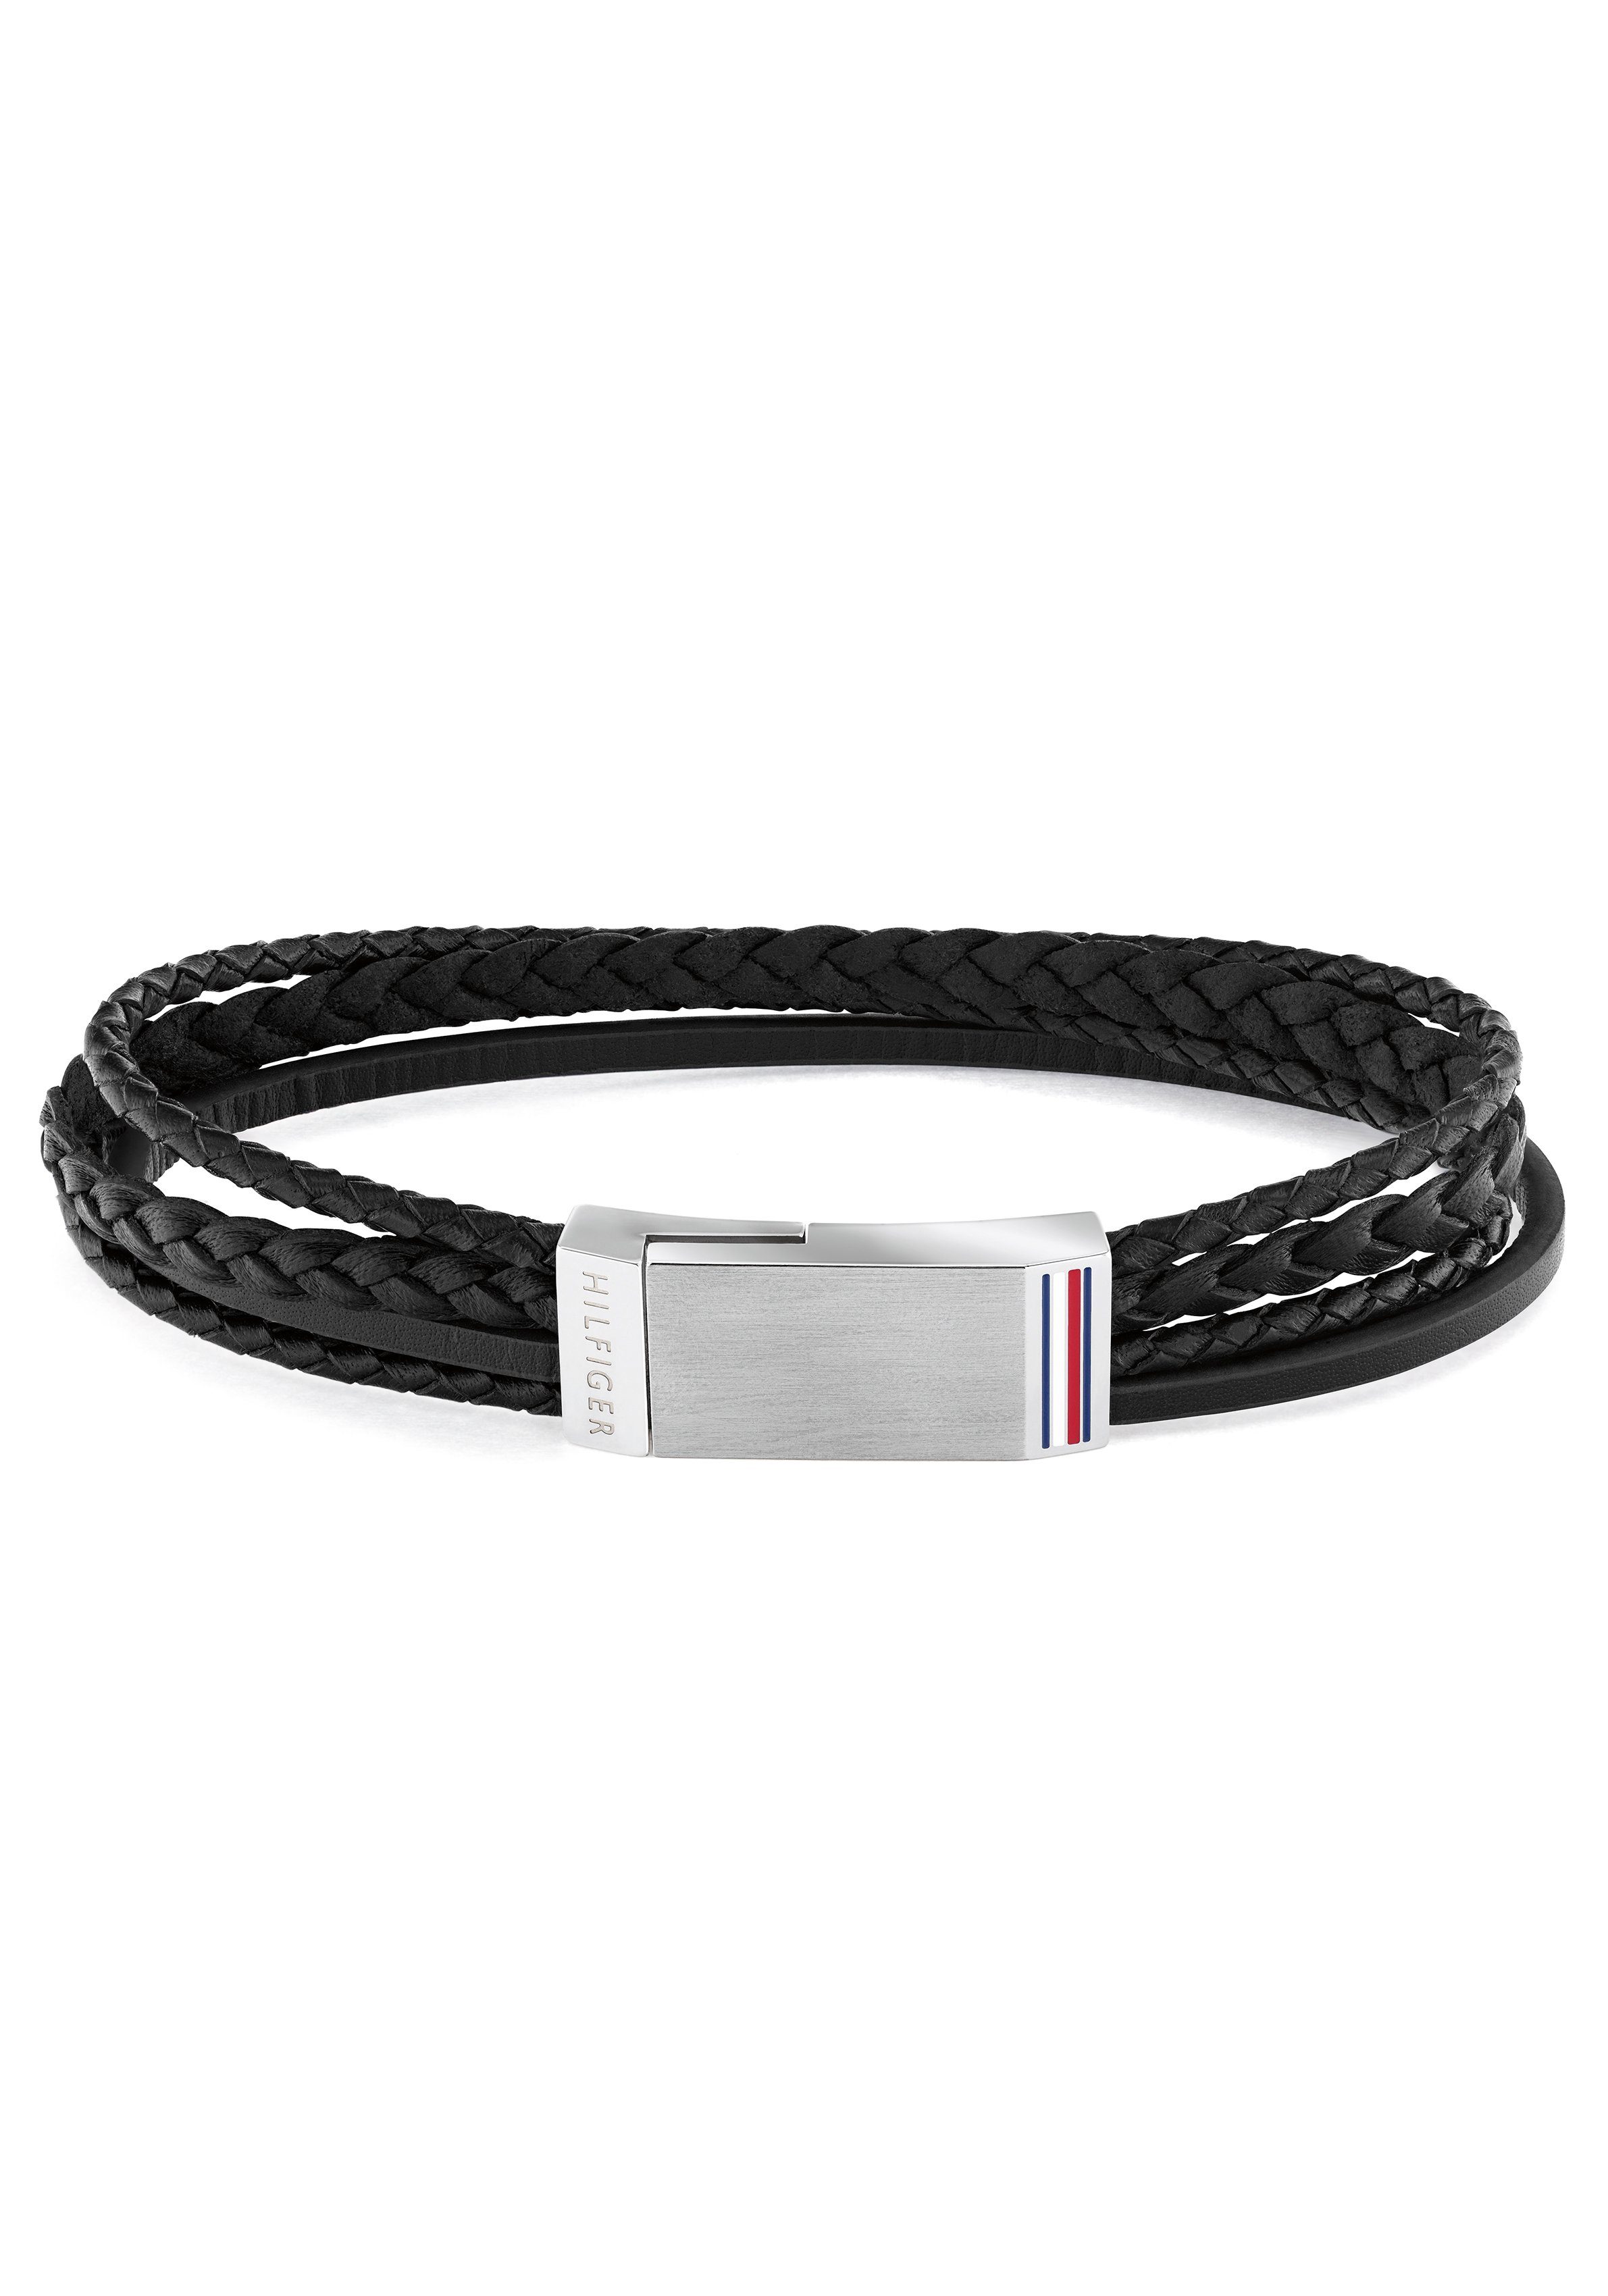 Tommy Hilfiger Armband »CASUAL CORE, 2790281S, 2790281L«, mit Emaille  online kaufen | OTTO